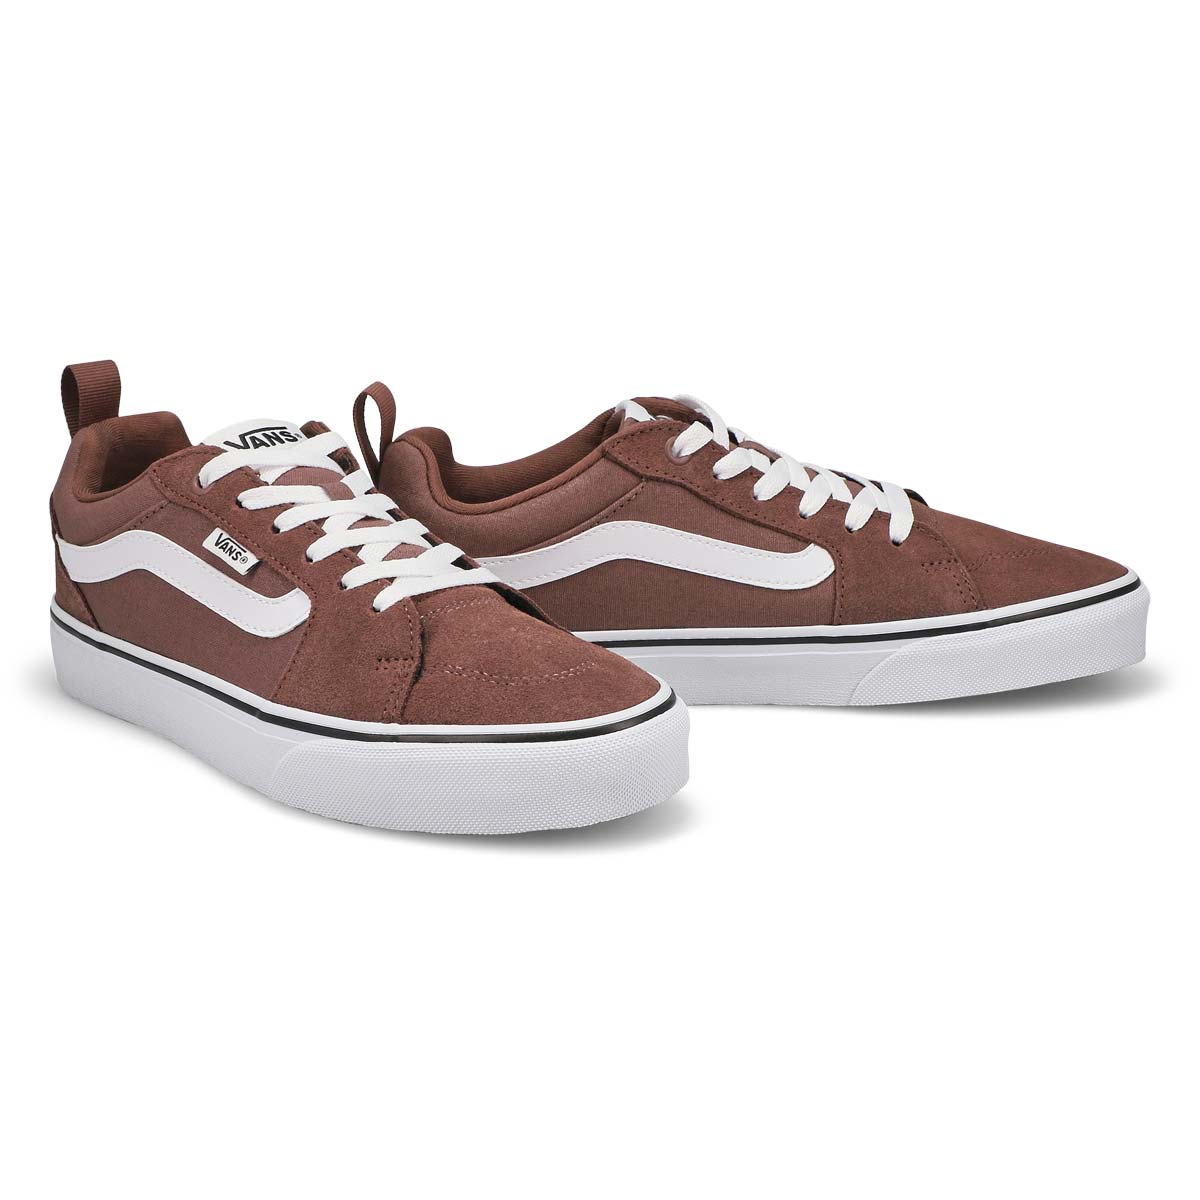 Men's Filmore Lace Up Sneaker - Taupe/White